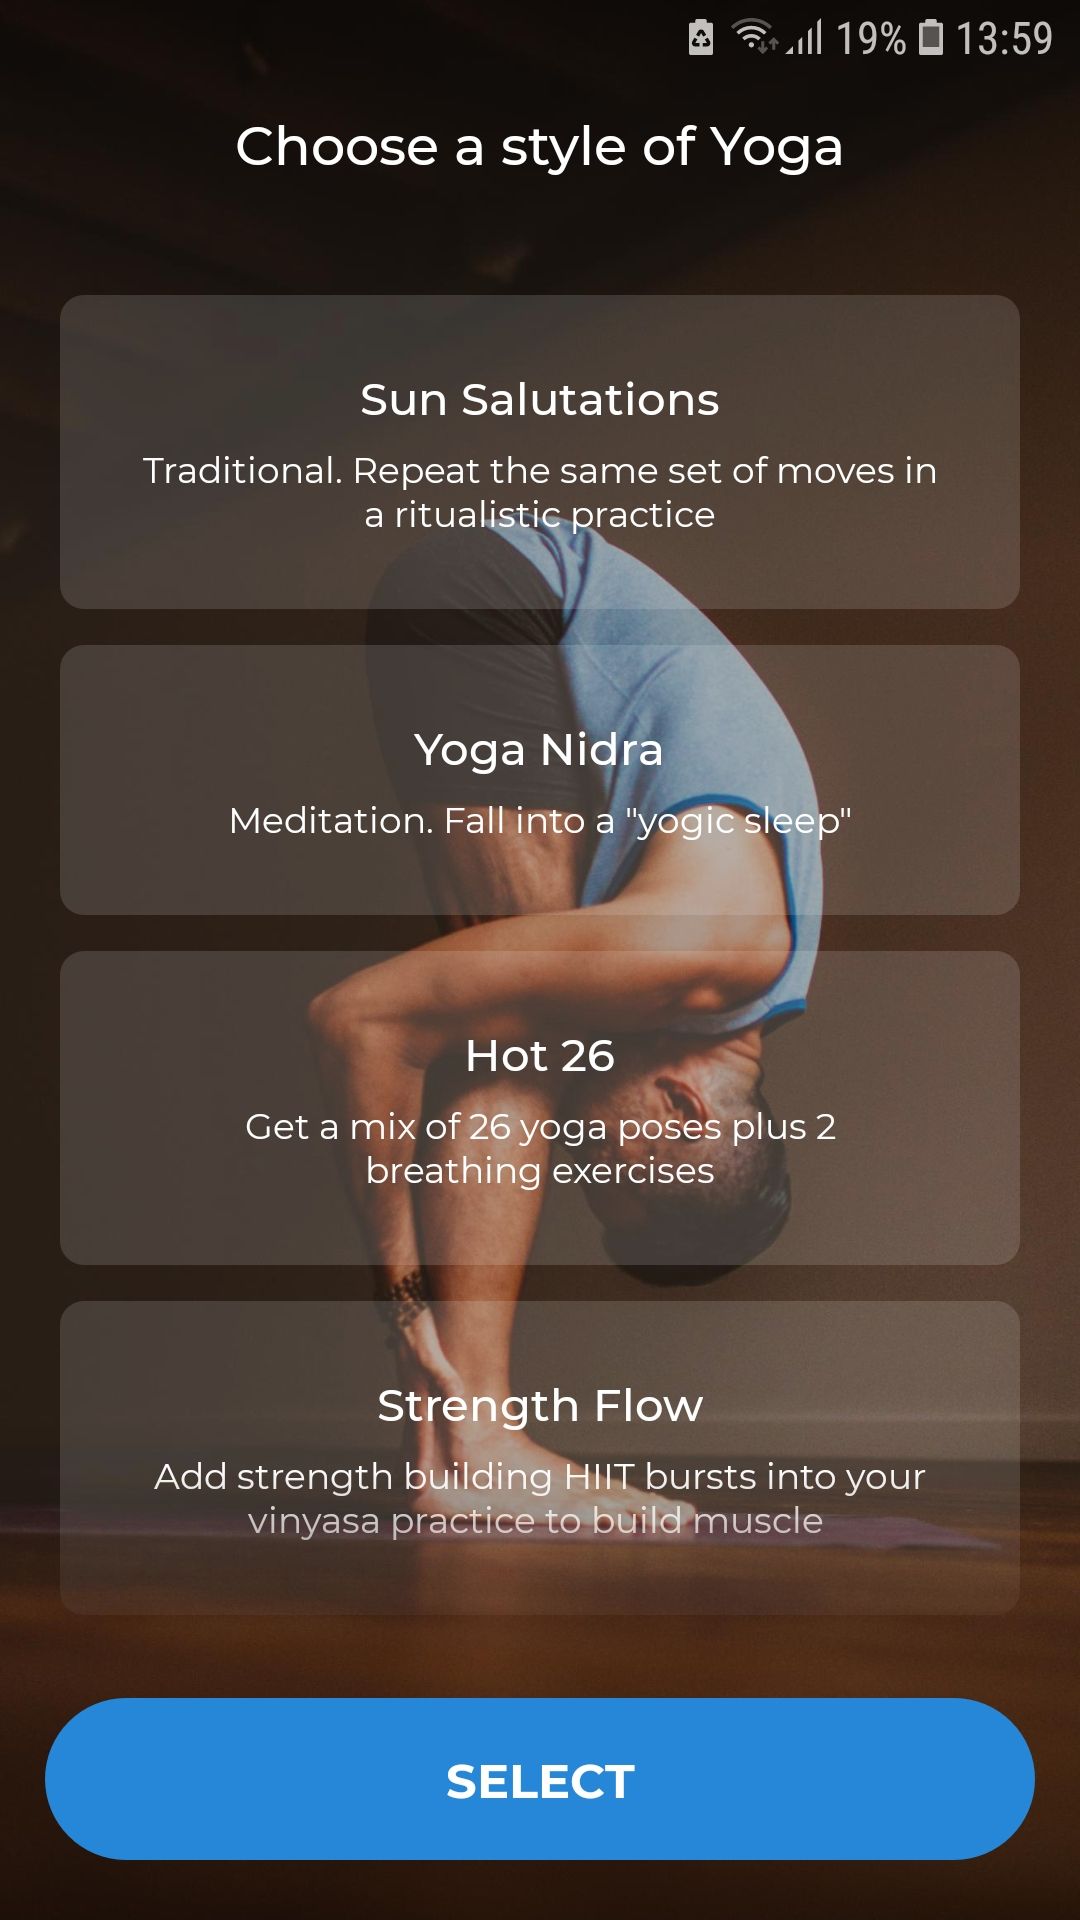 Down Dog Yoga style mobile workout app